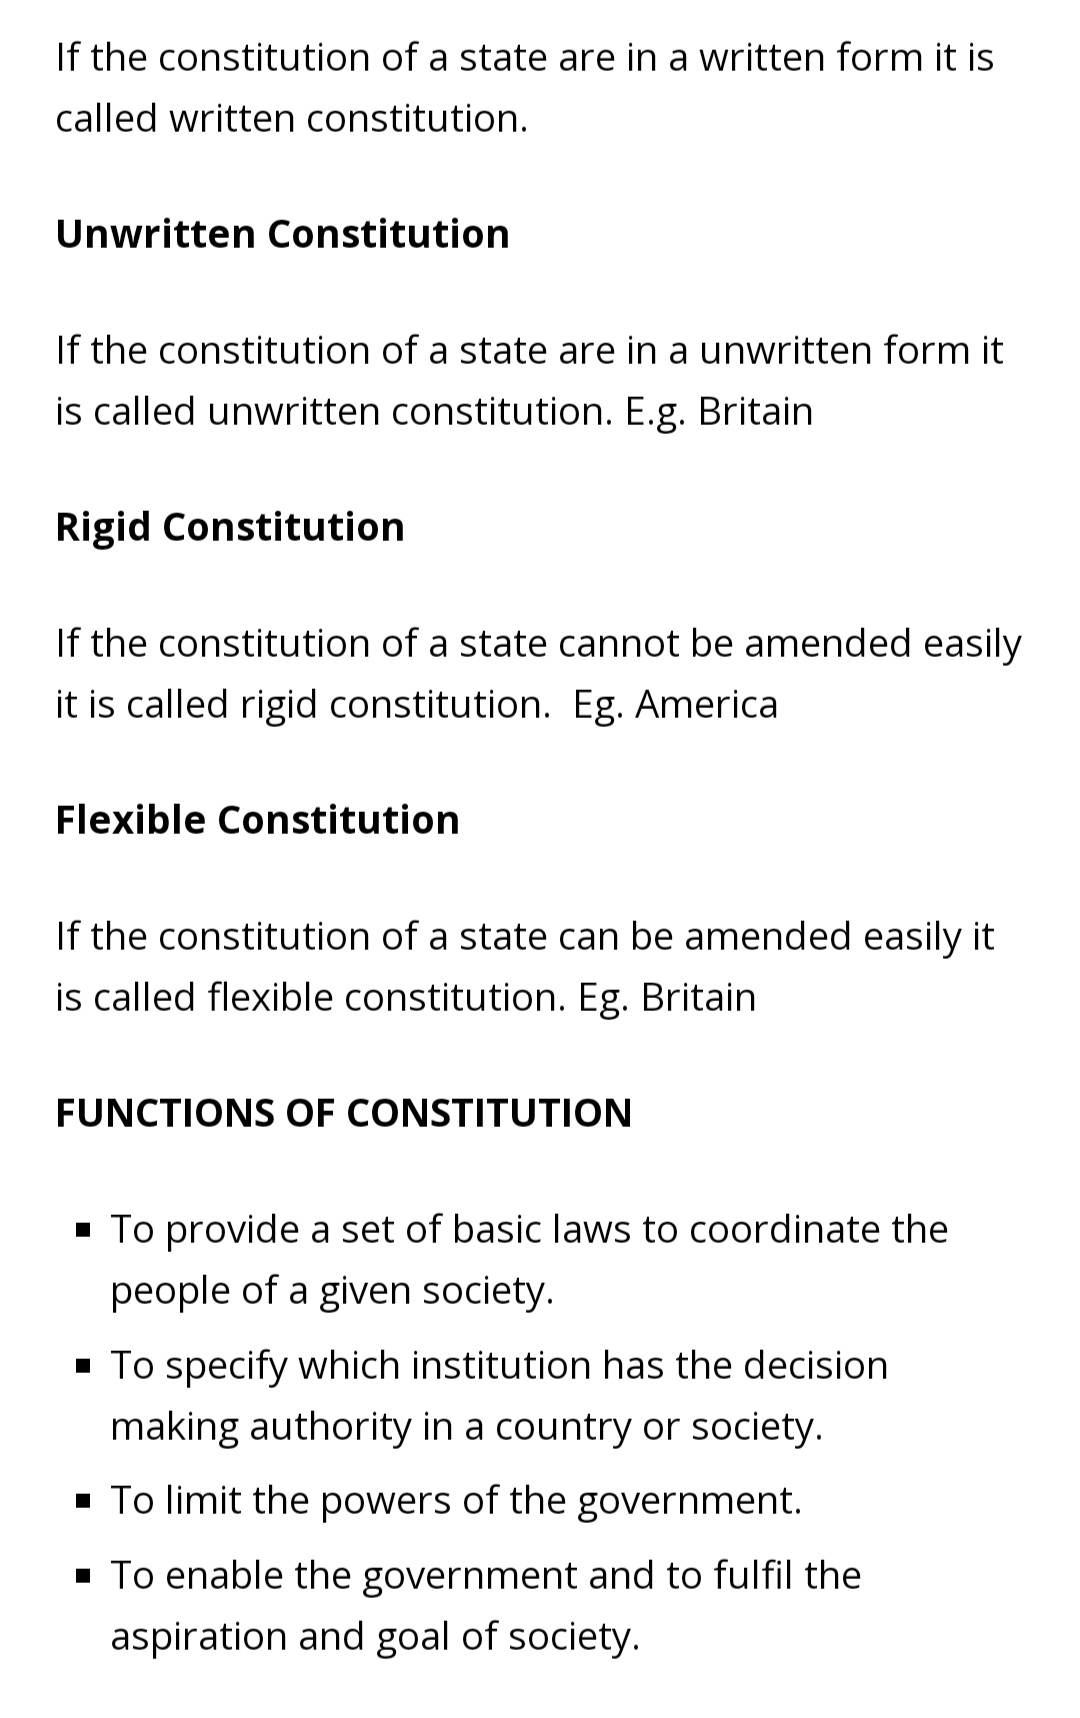 difference between written and unwritten constitution